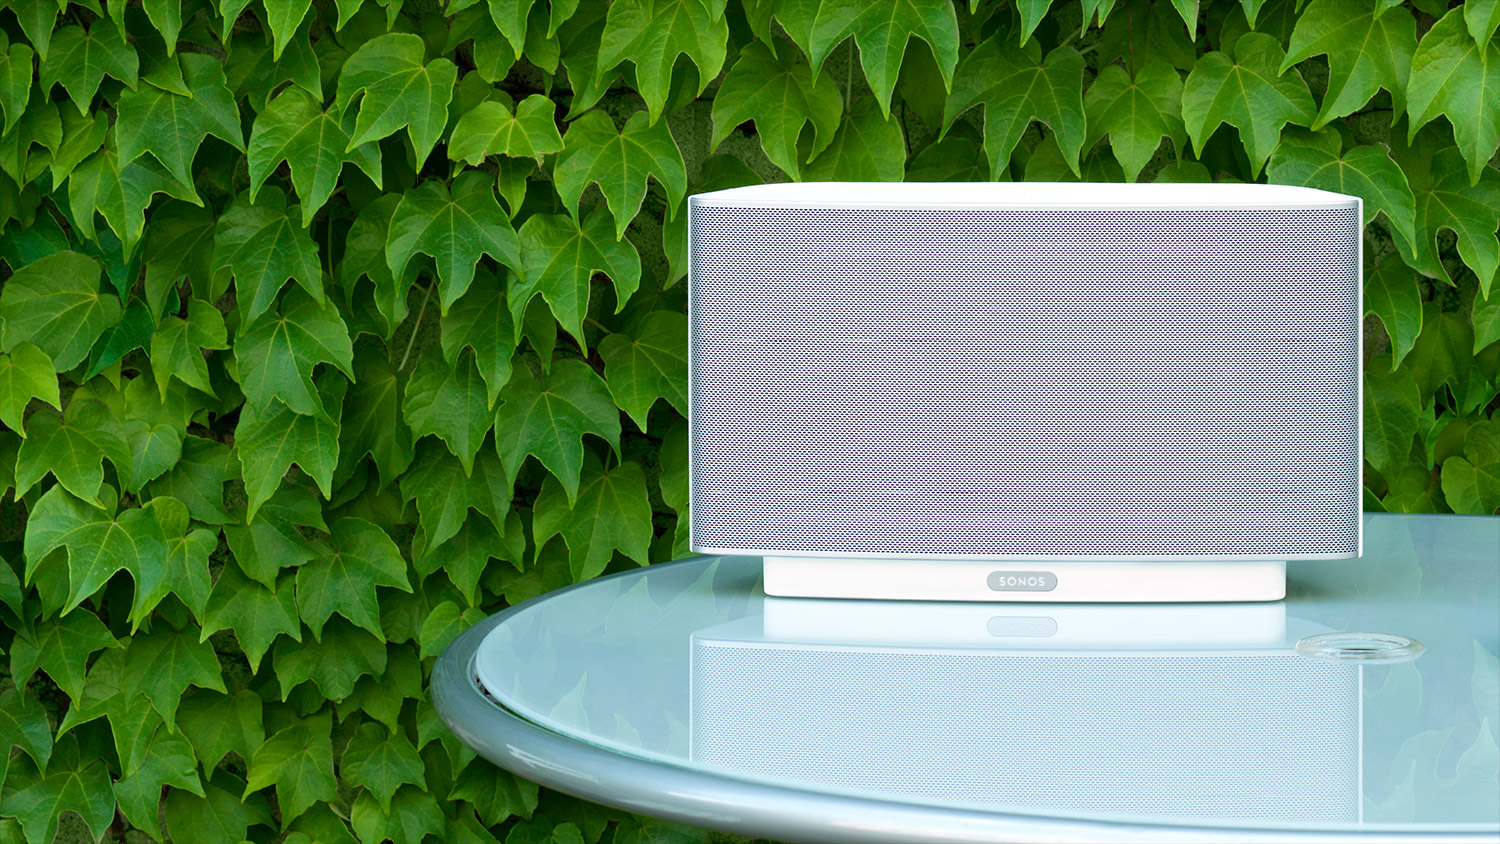 REVIEW: Sonos Wireless Speaker - At Home in